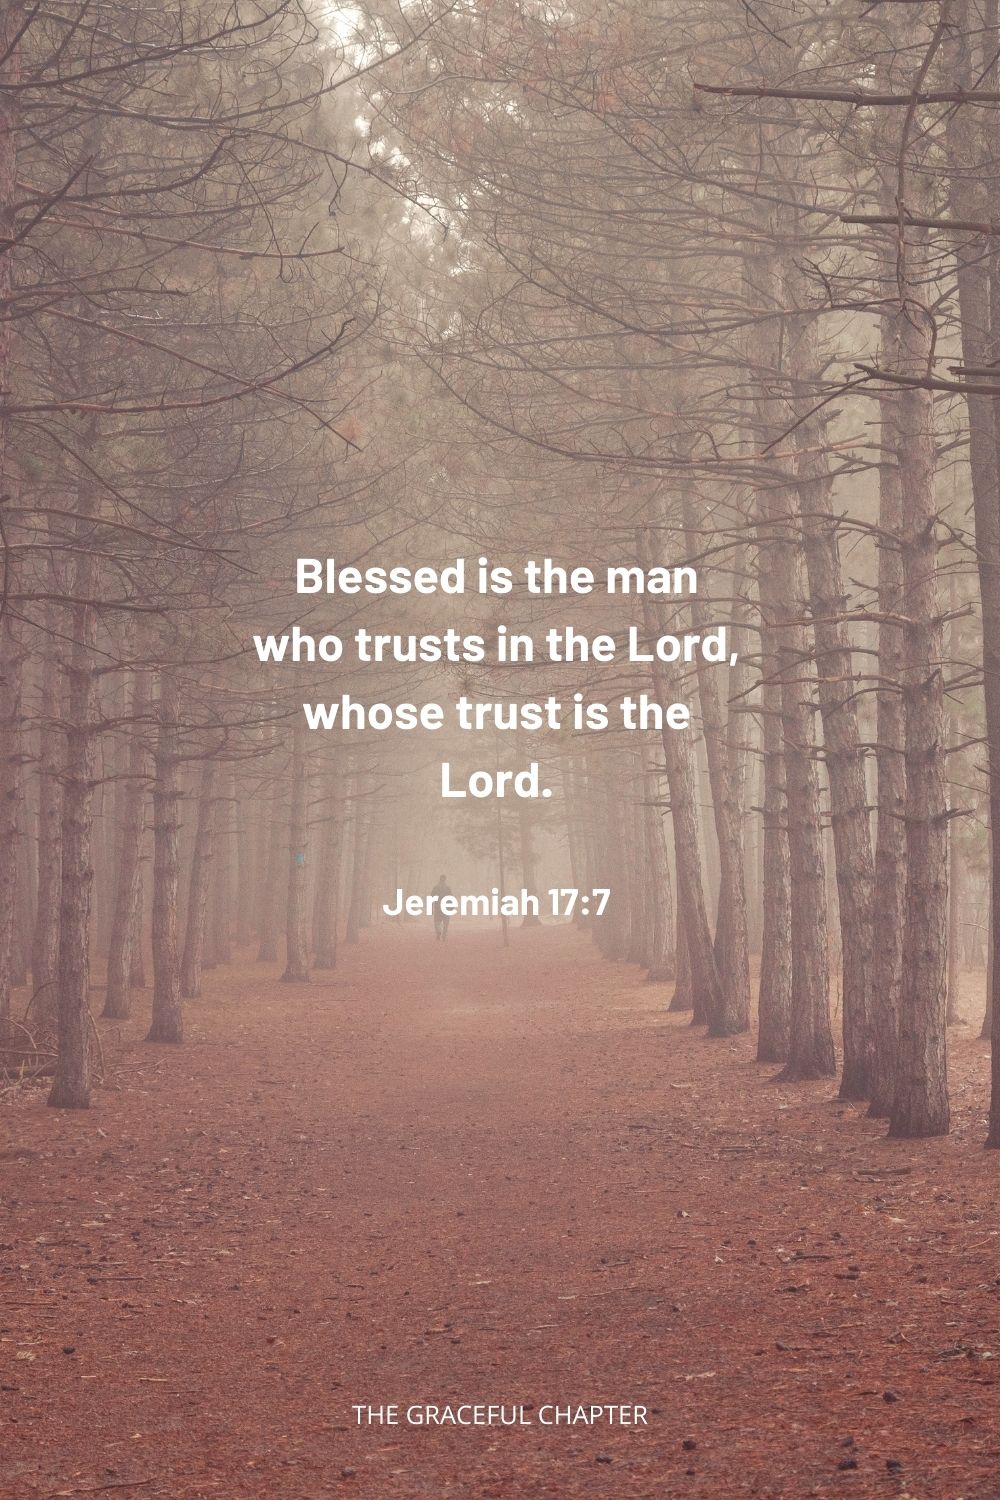 Blessed is the man who trusts in the Lord, whose trust is the Lord. Jeremiah 17:7